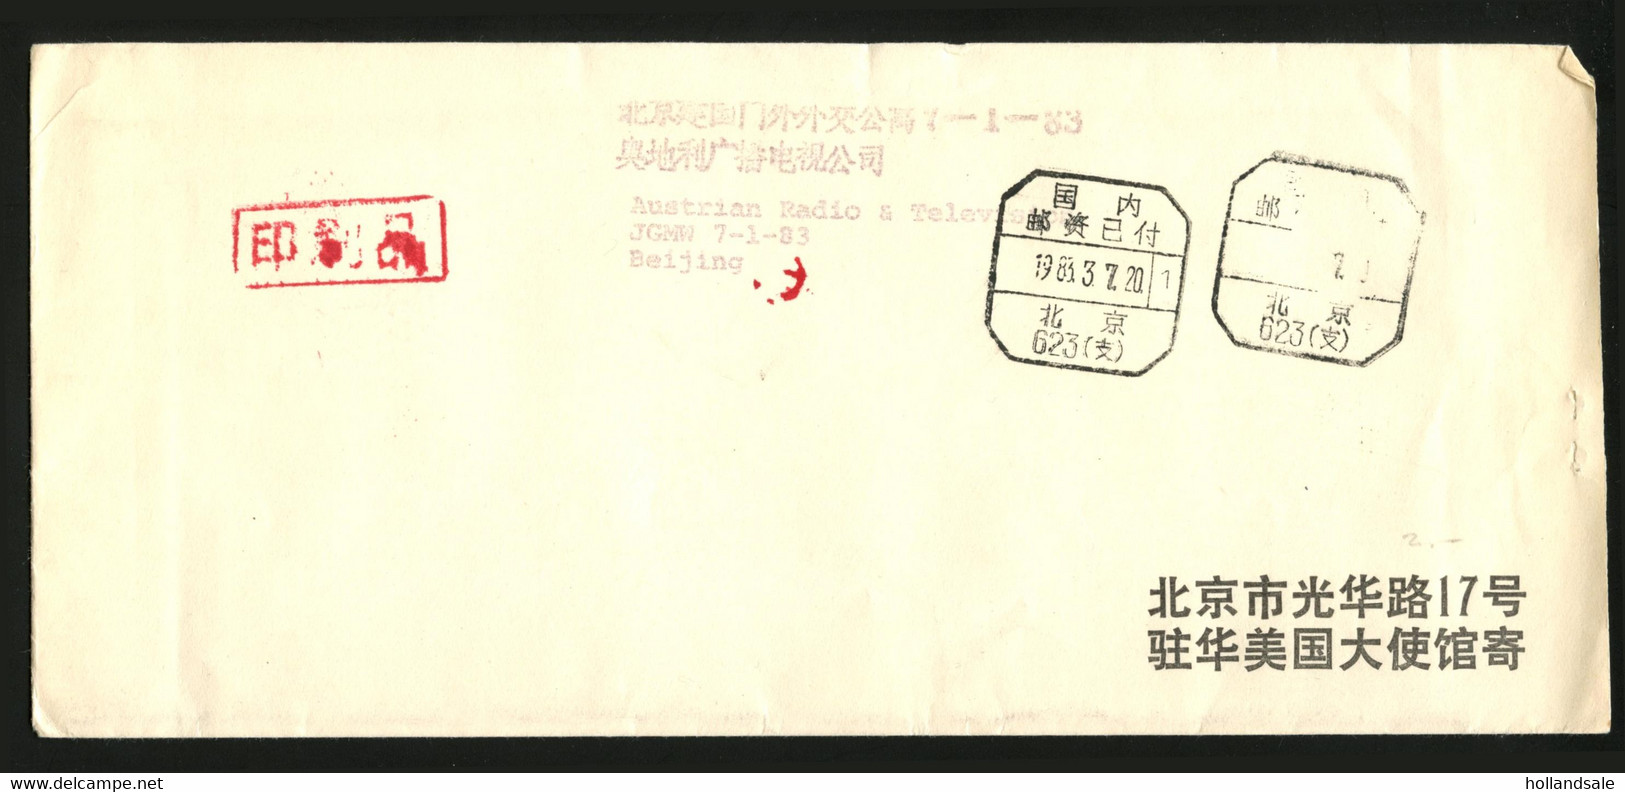 CHINA PRC - Lot of 7 covers with Octagonal Postage Paid cancellations..